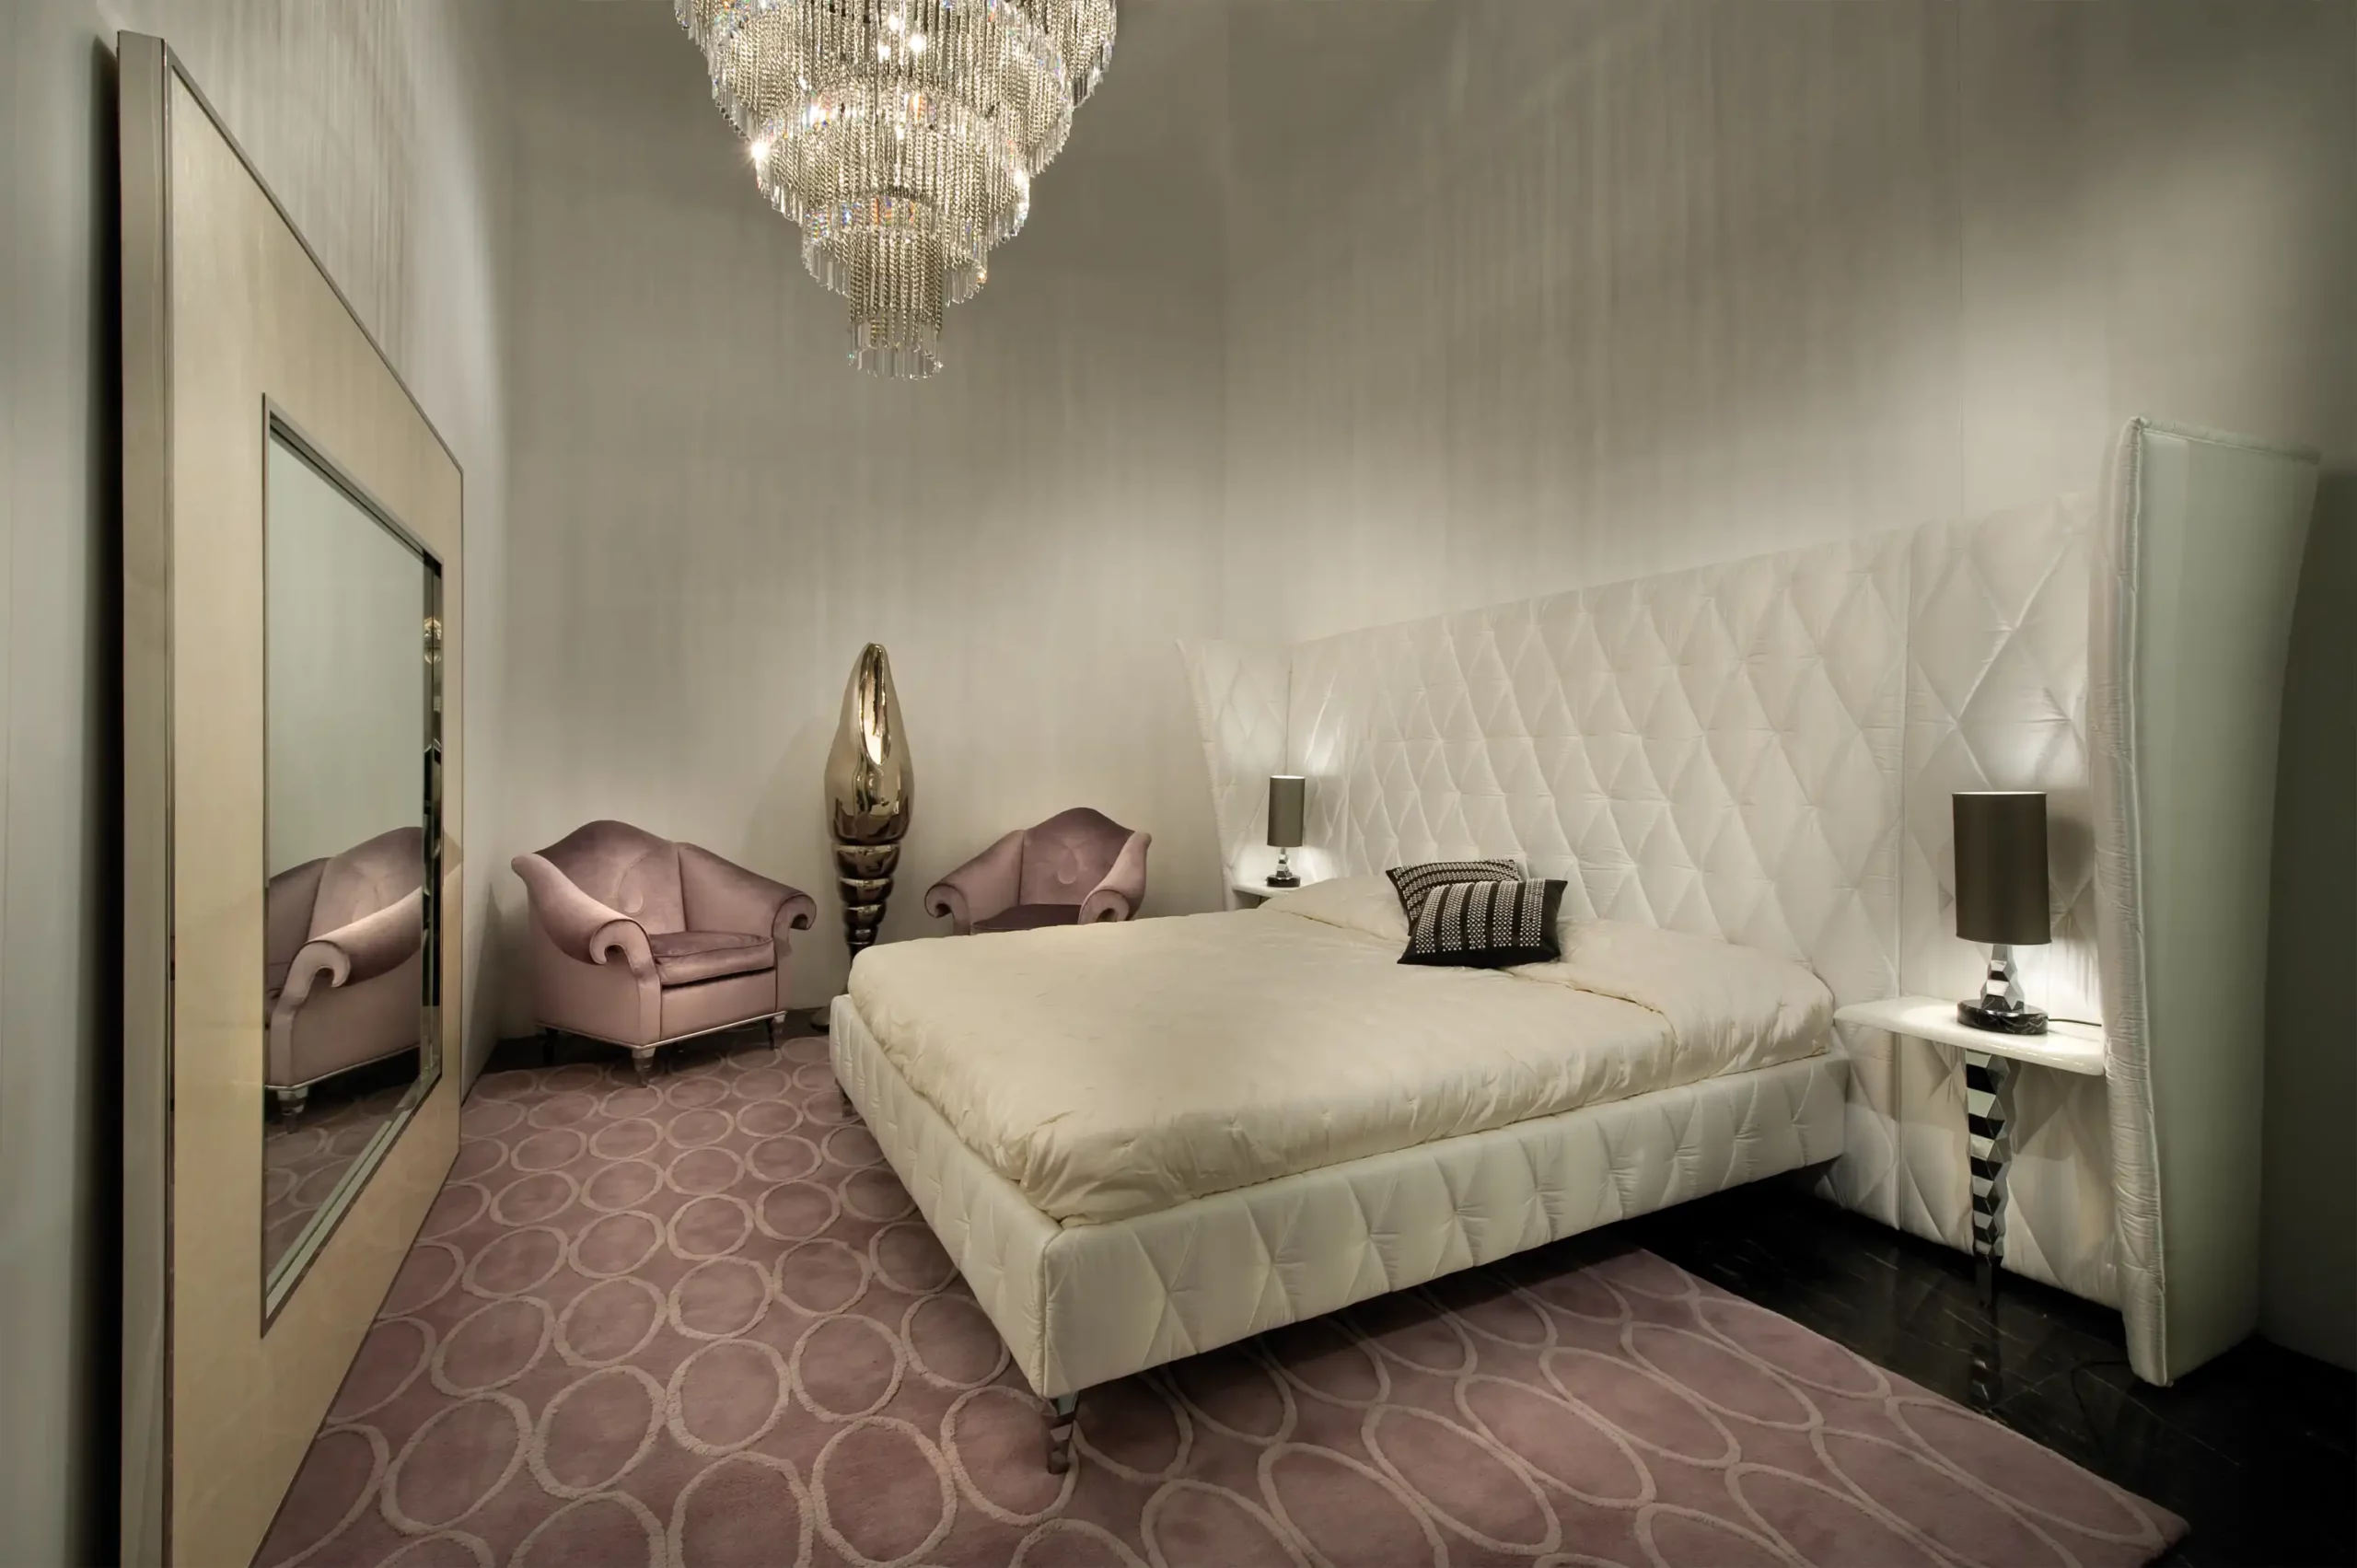 luxury bedroom design with mother of pearl style